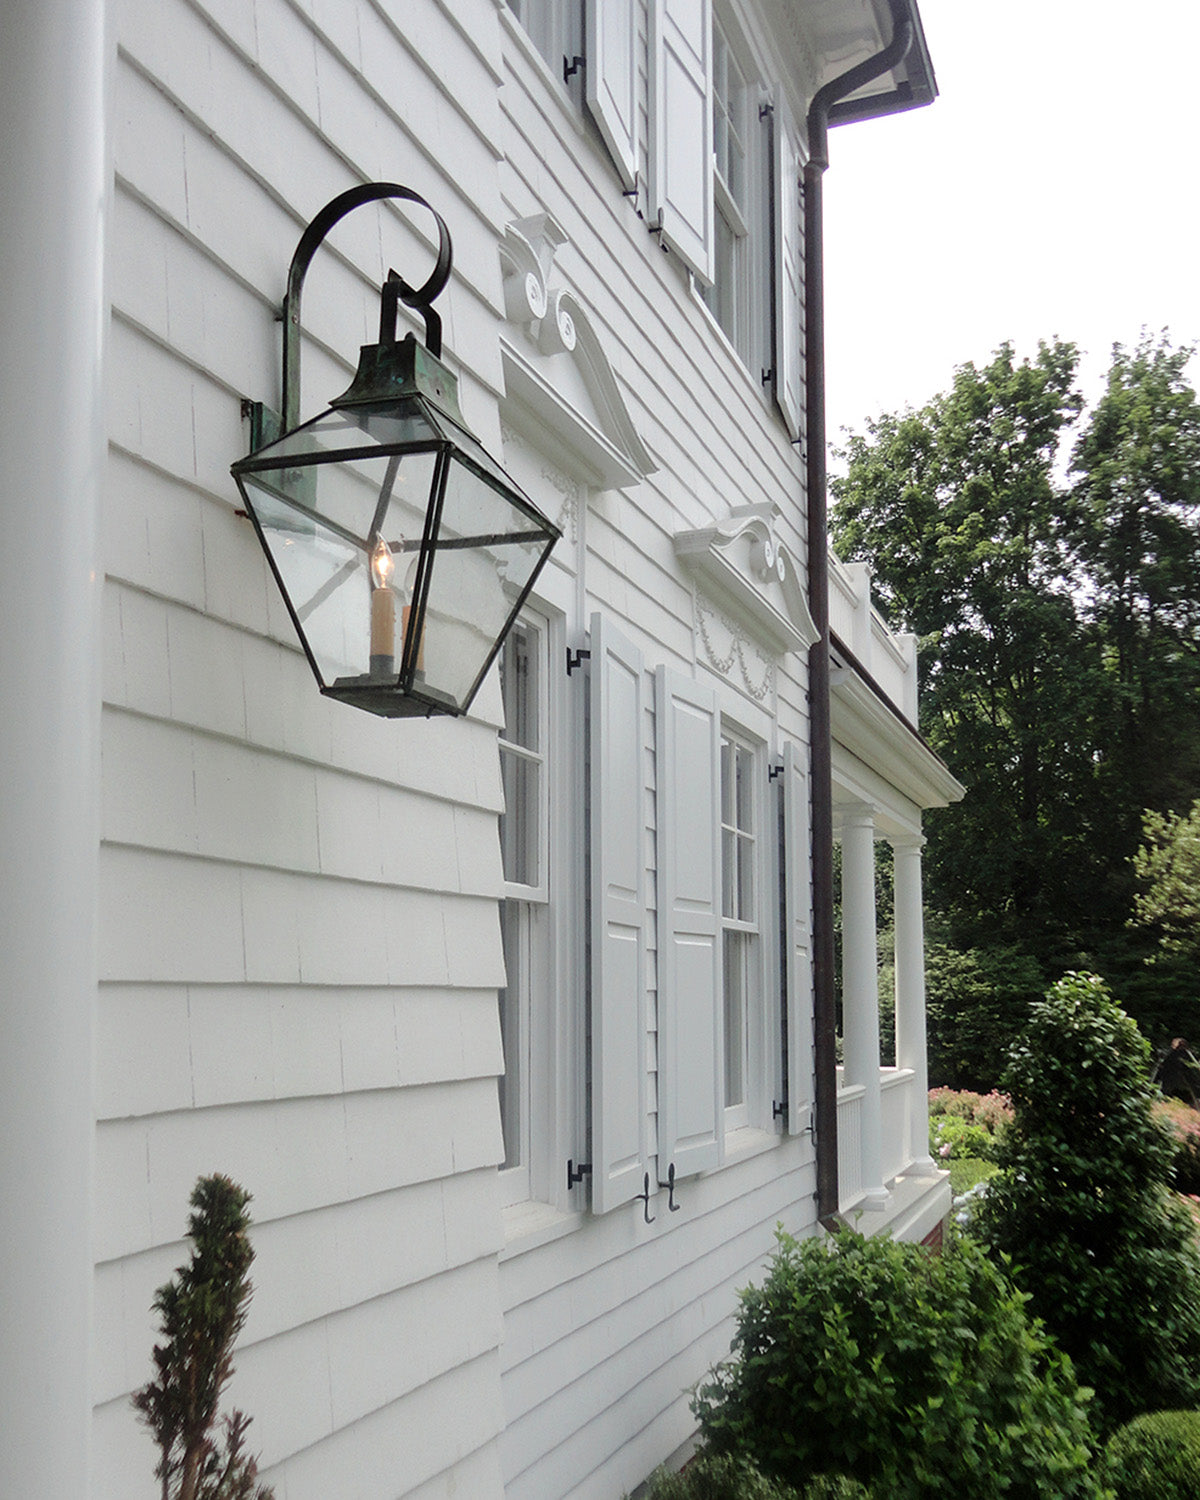 An eight-sided exterior wall lantern on a looping bracket mounted on the facade of a white clapboard home.